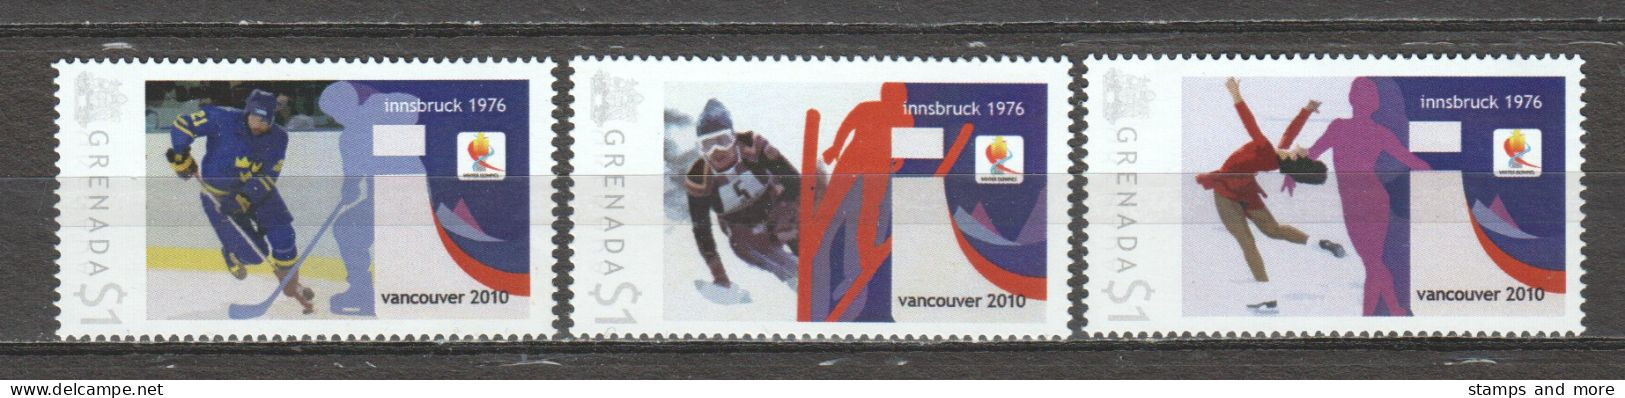 Grenada - Limited Edition Serie 12 MNH - WINTER OLYMPICS VANCOUVER 2010 - INNSBRUCK 1976 - Winter 2010: Vancouver